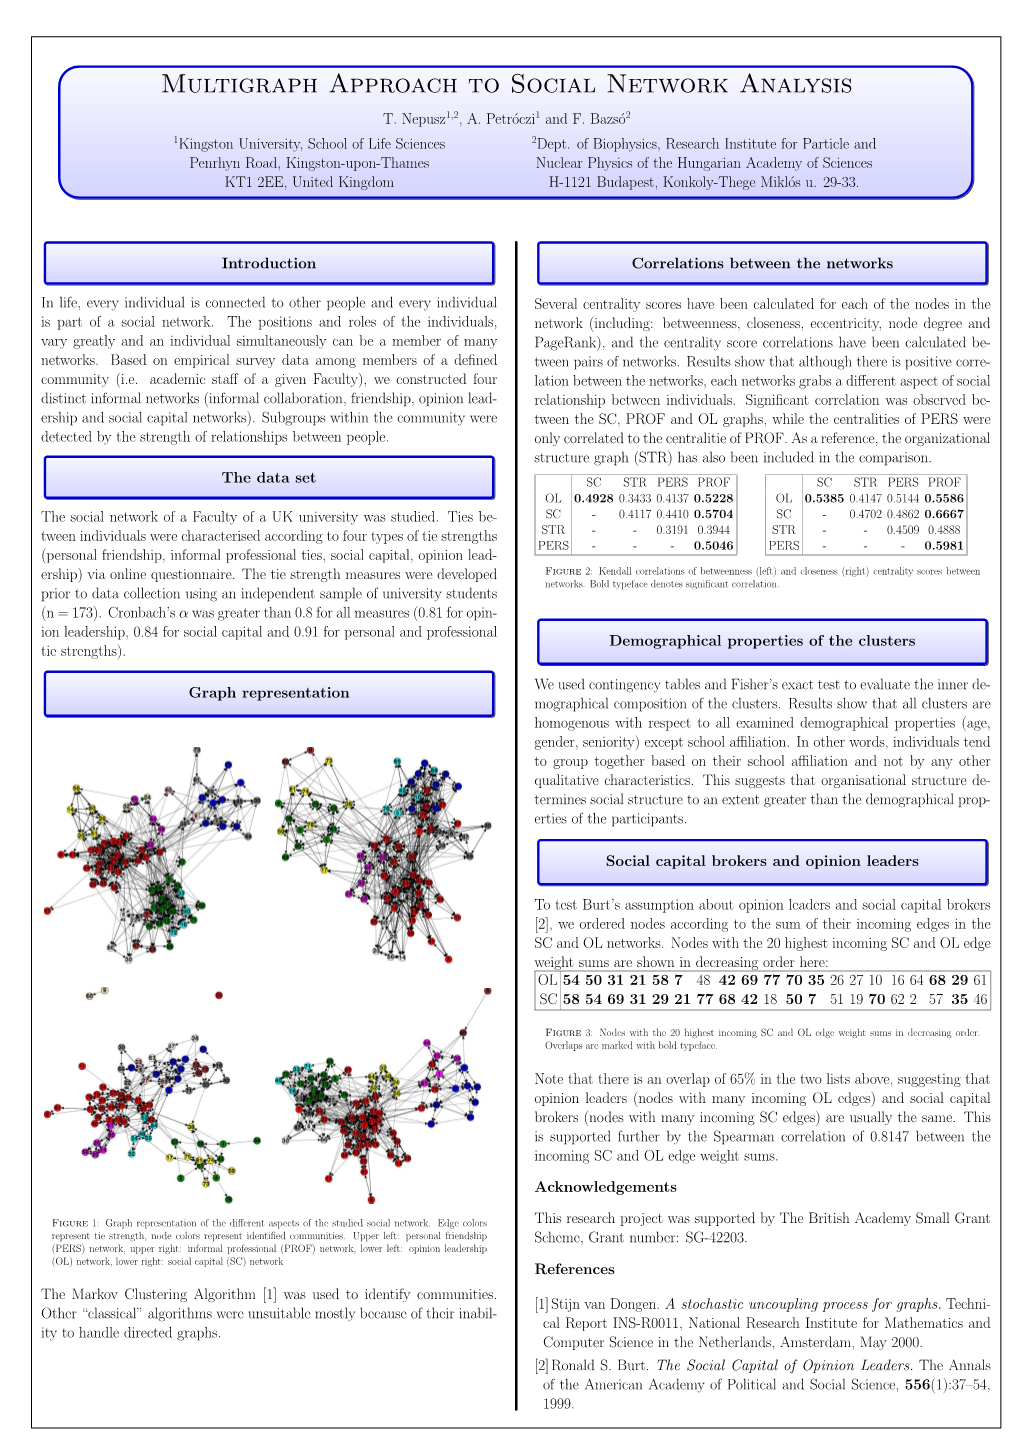 Multigraph Approach to Social Network Analysis